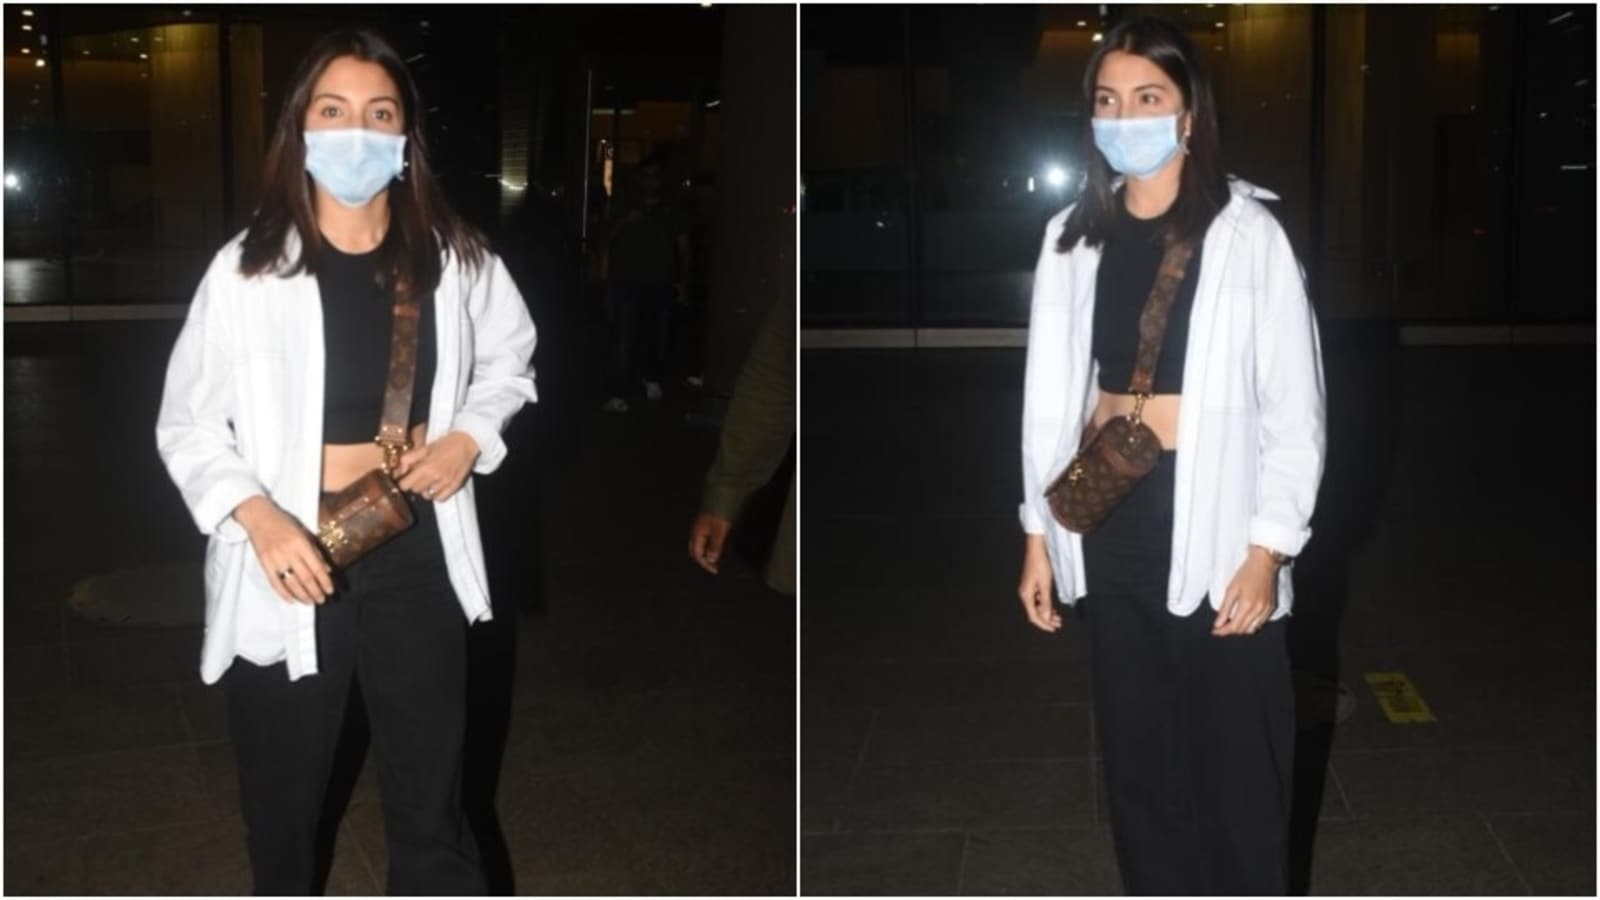 anushka-sharma-is-the-queen-of-monochrome-dressing-as-she-aces-an-effortless-airport-look-check-out-pics-video